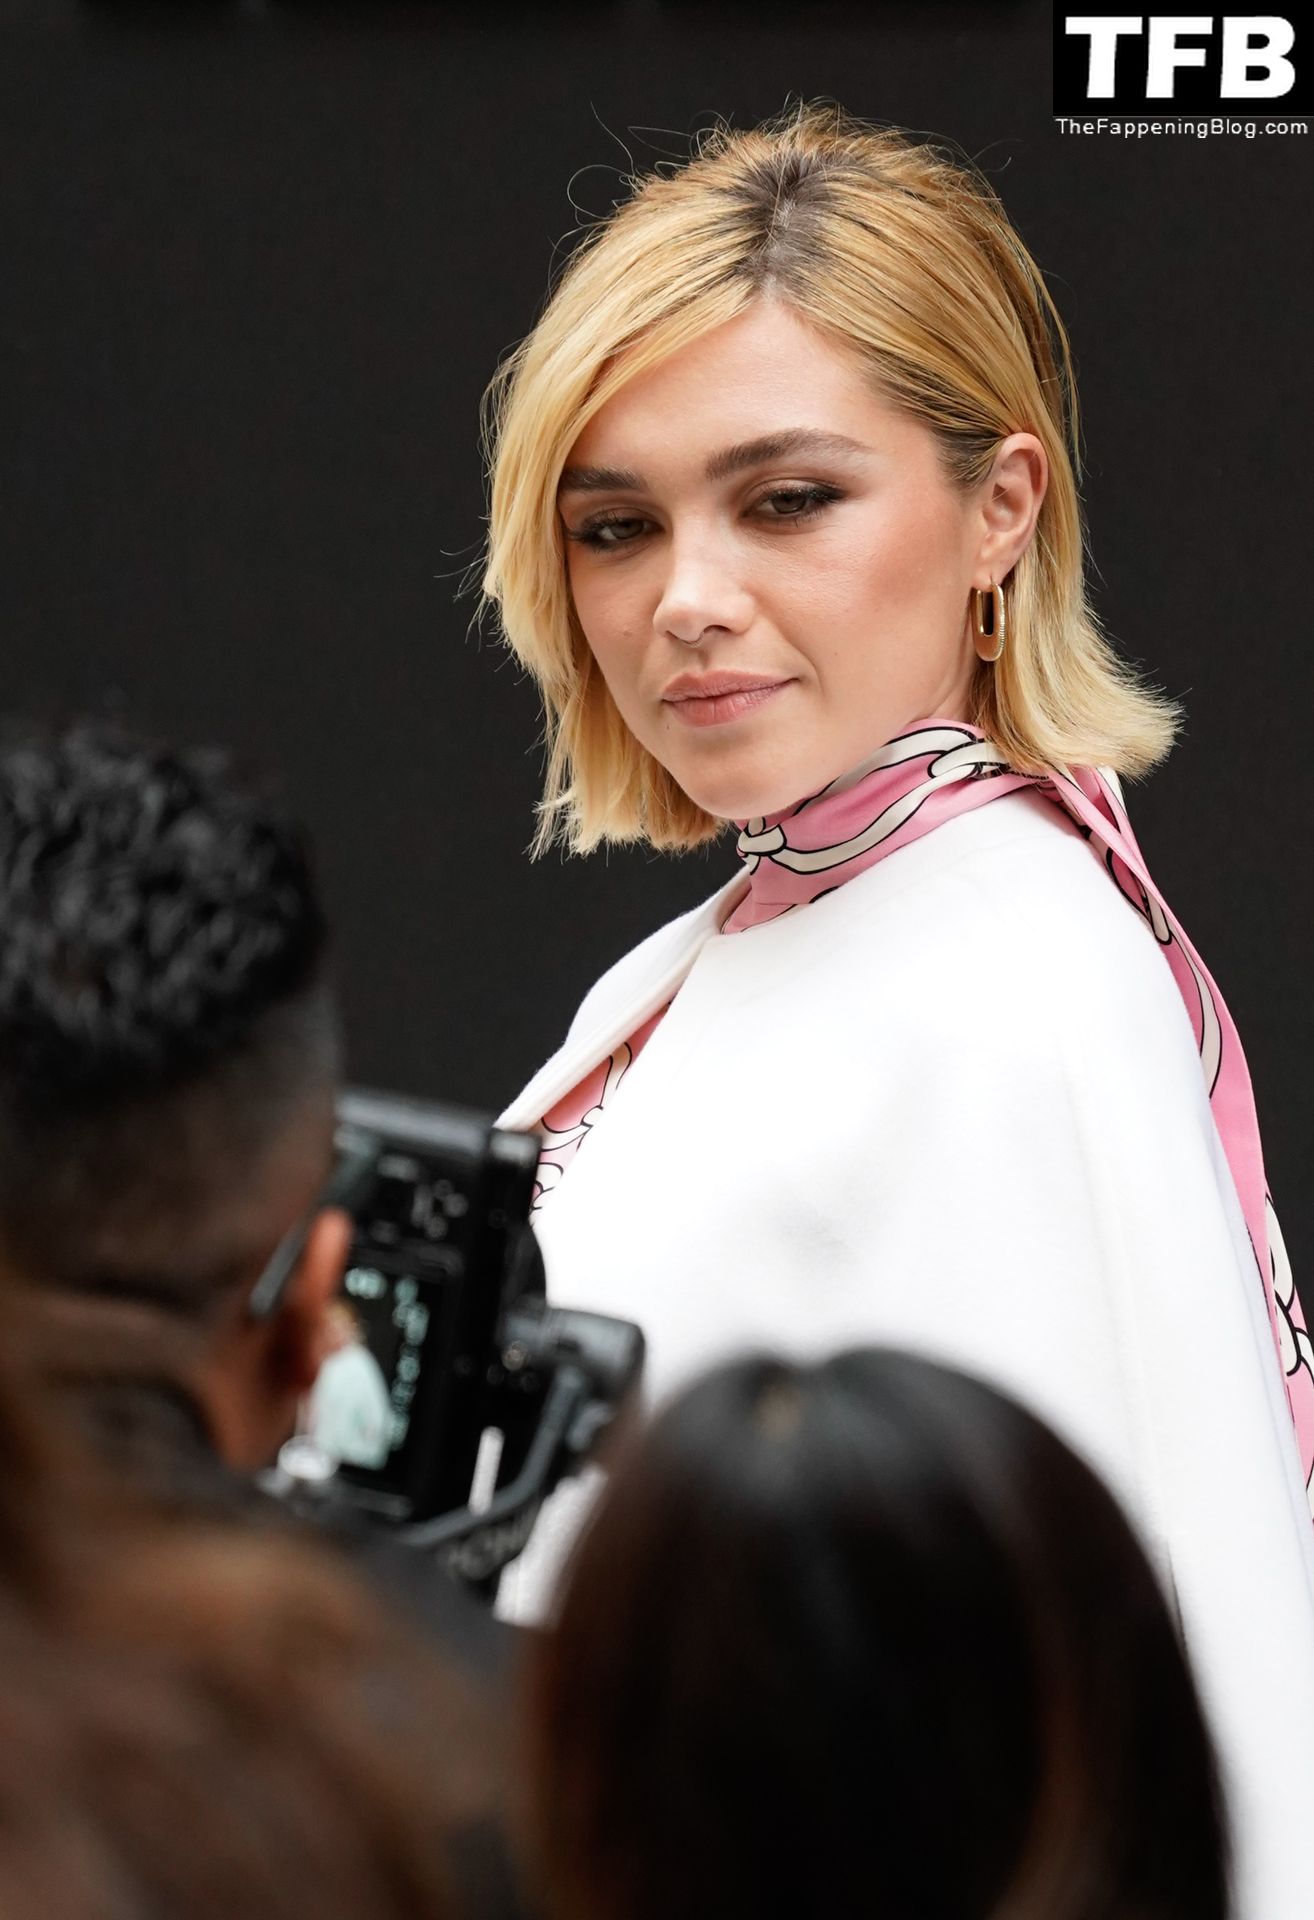 Florence-Pugh-Sexy-The-Fappening-Blog-35.jpg